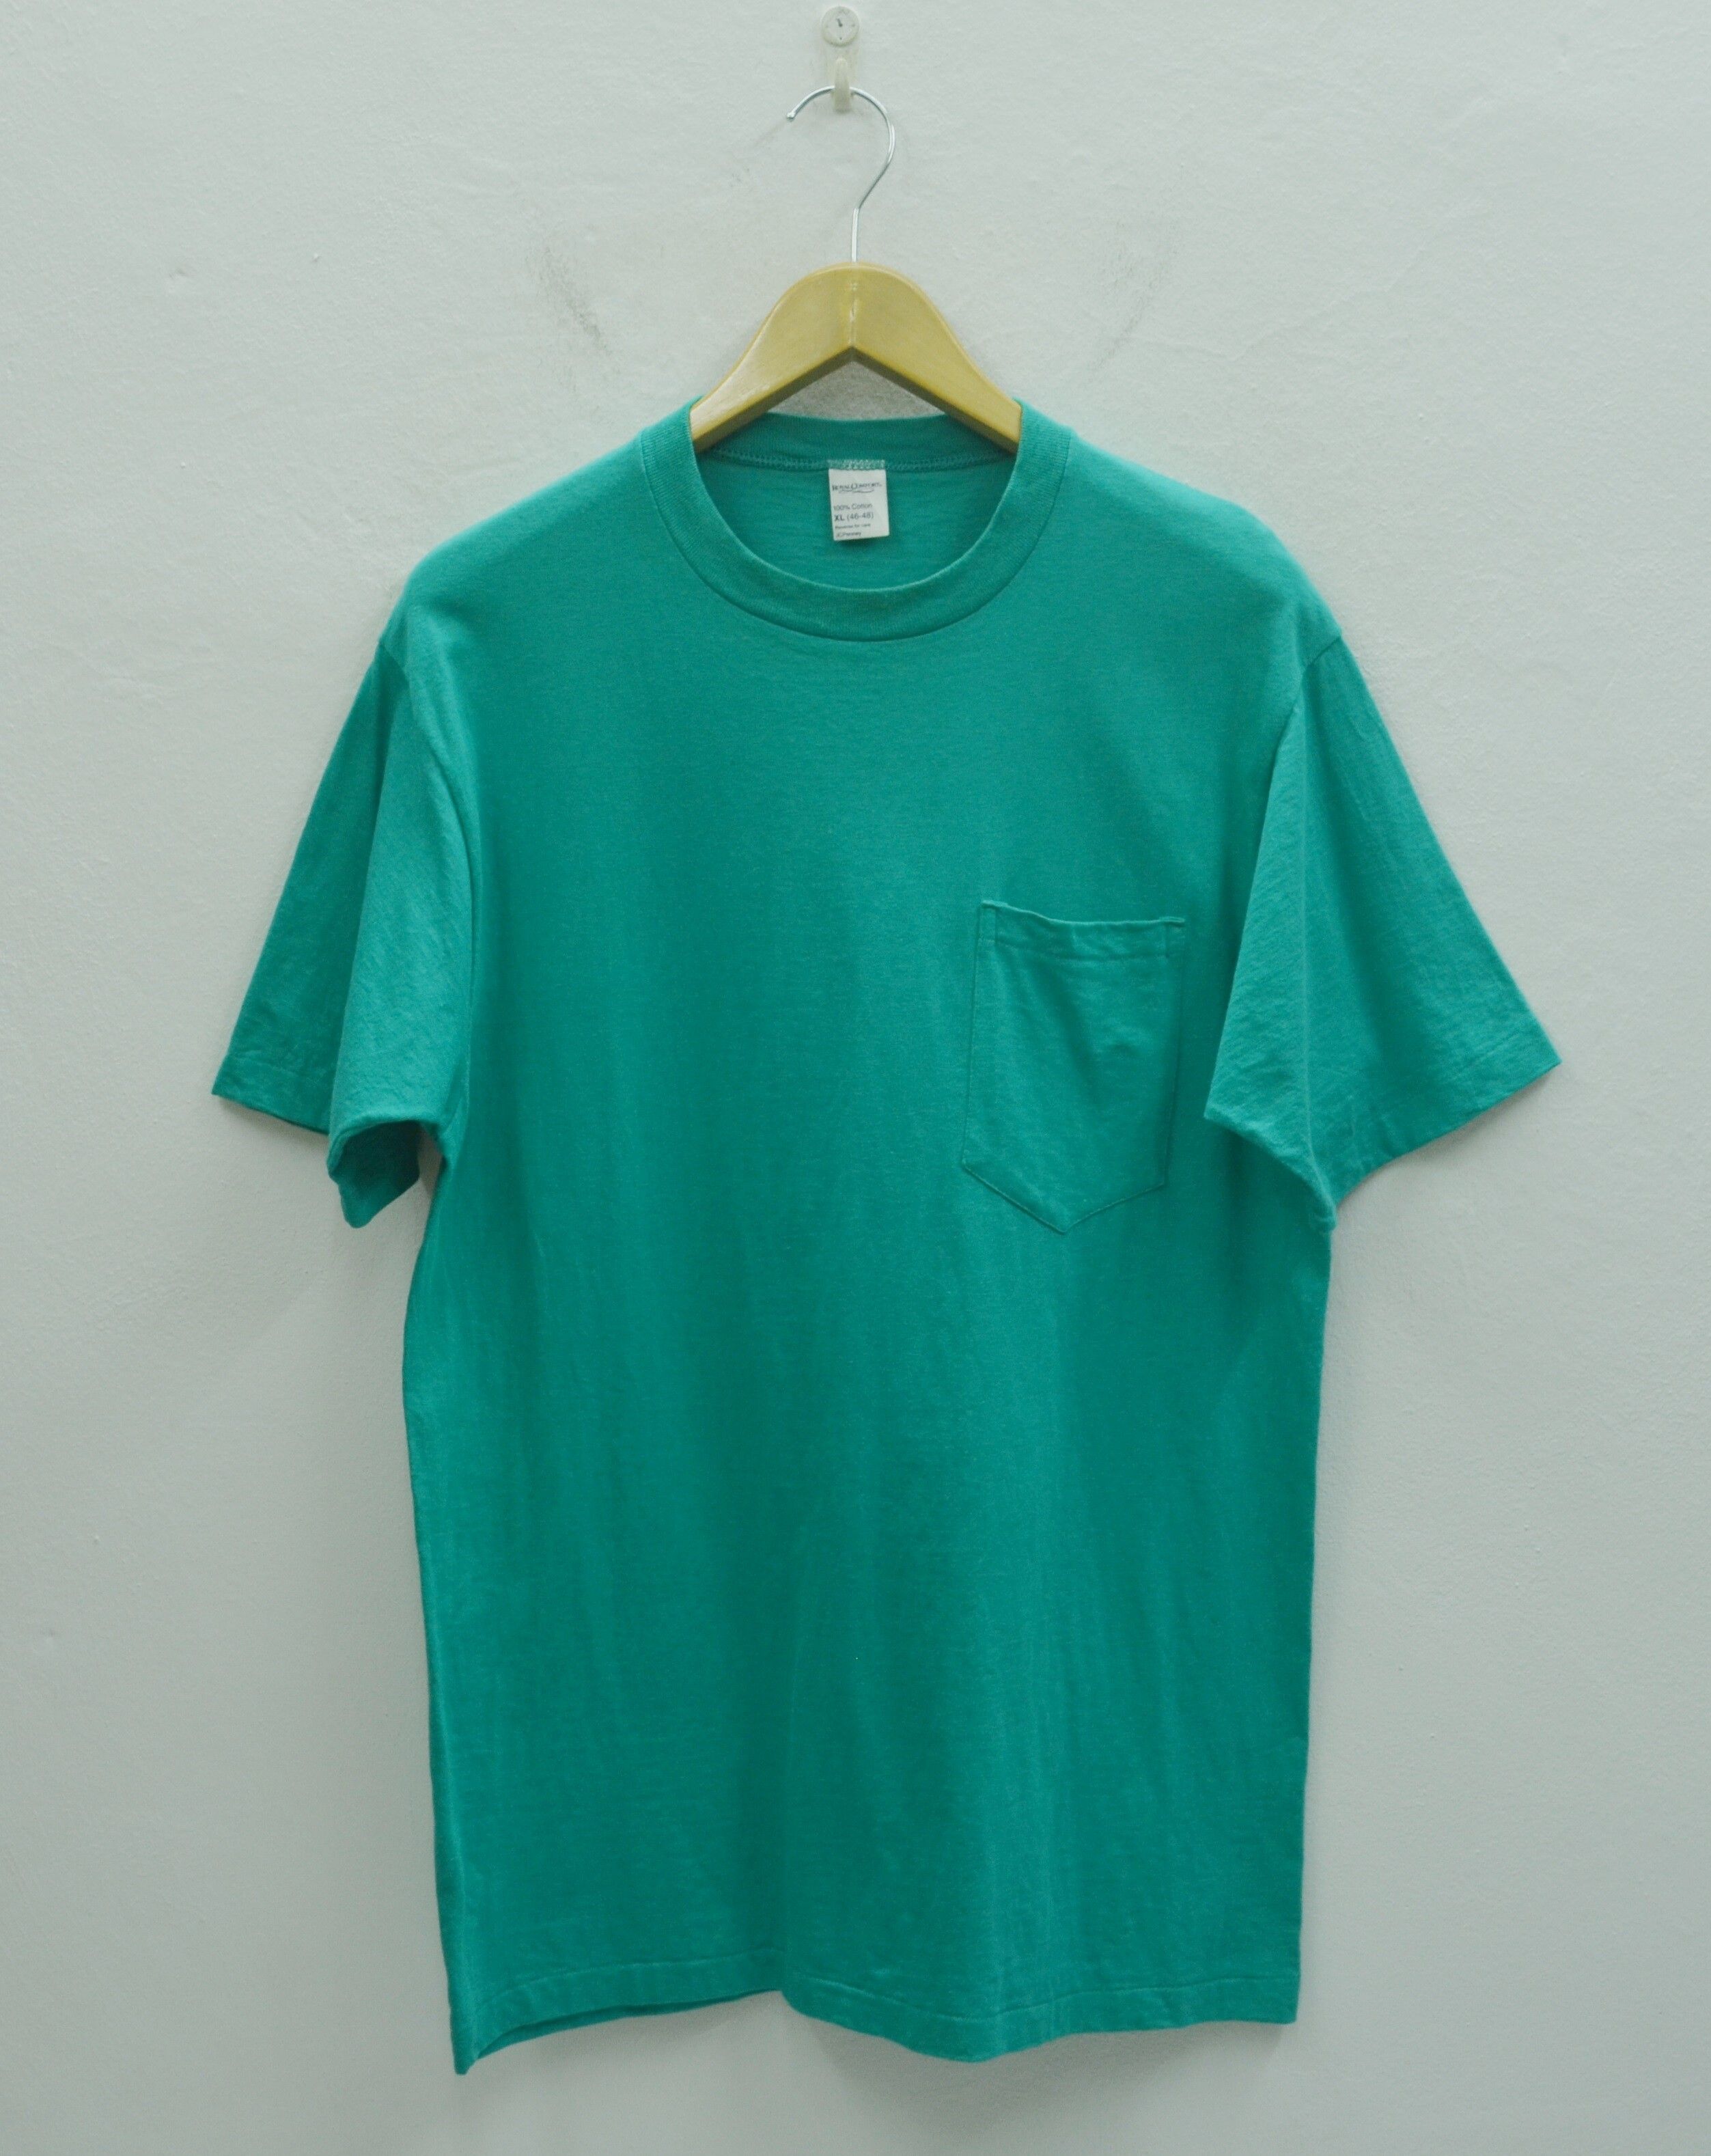 Vintage 90s JCPenney Royal Comfort Blank Pocket Tee Made In USA Size US L / EU 52-54 / 3 - 1 Preview